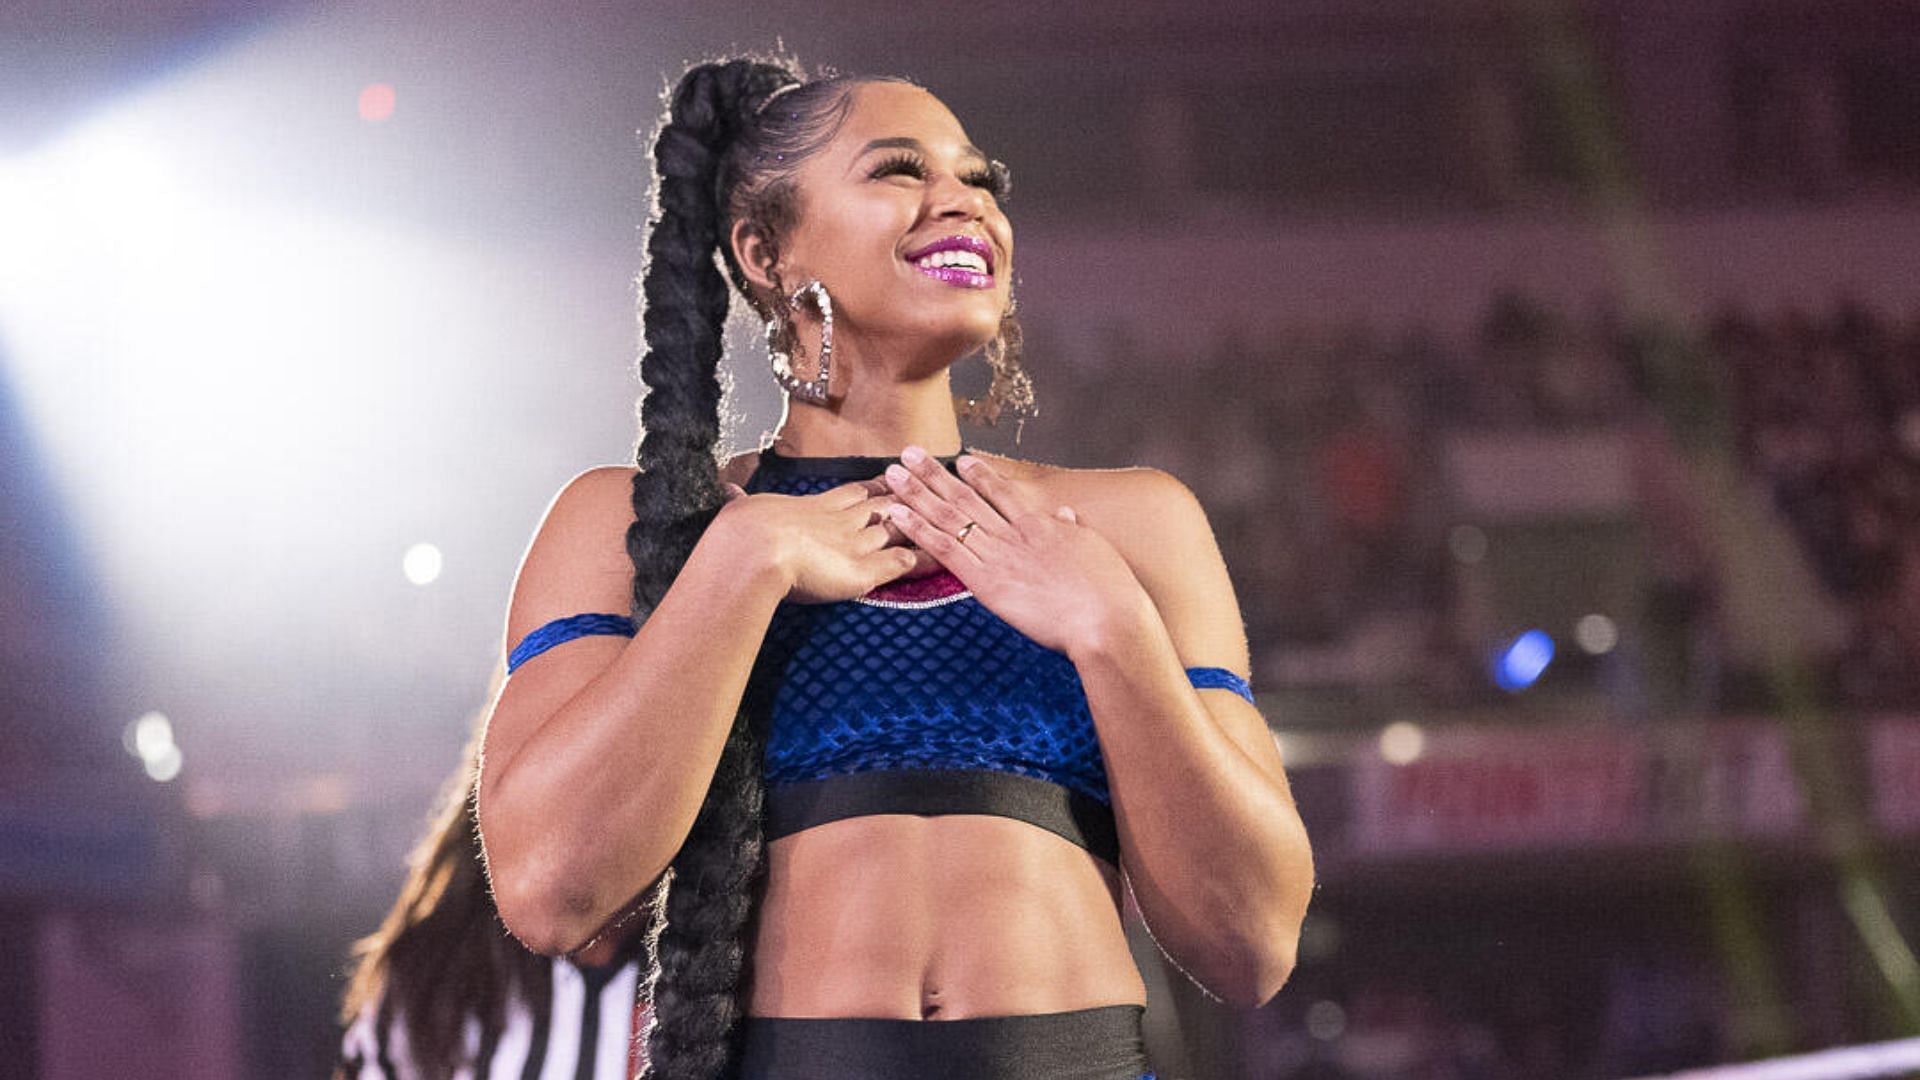 Bianca Belair performs on the SmackDown brand (Credit: WWE)